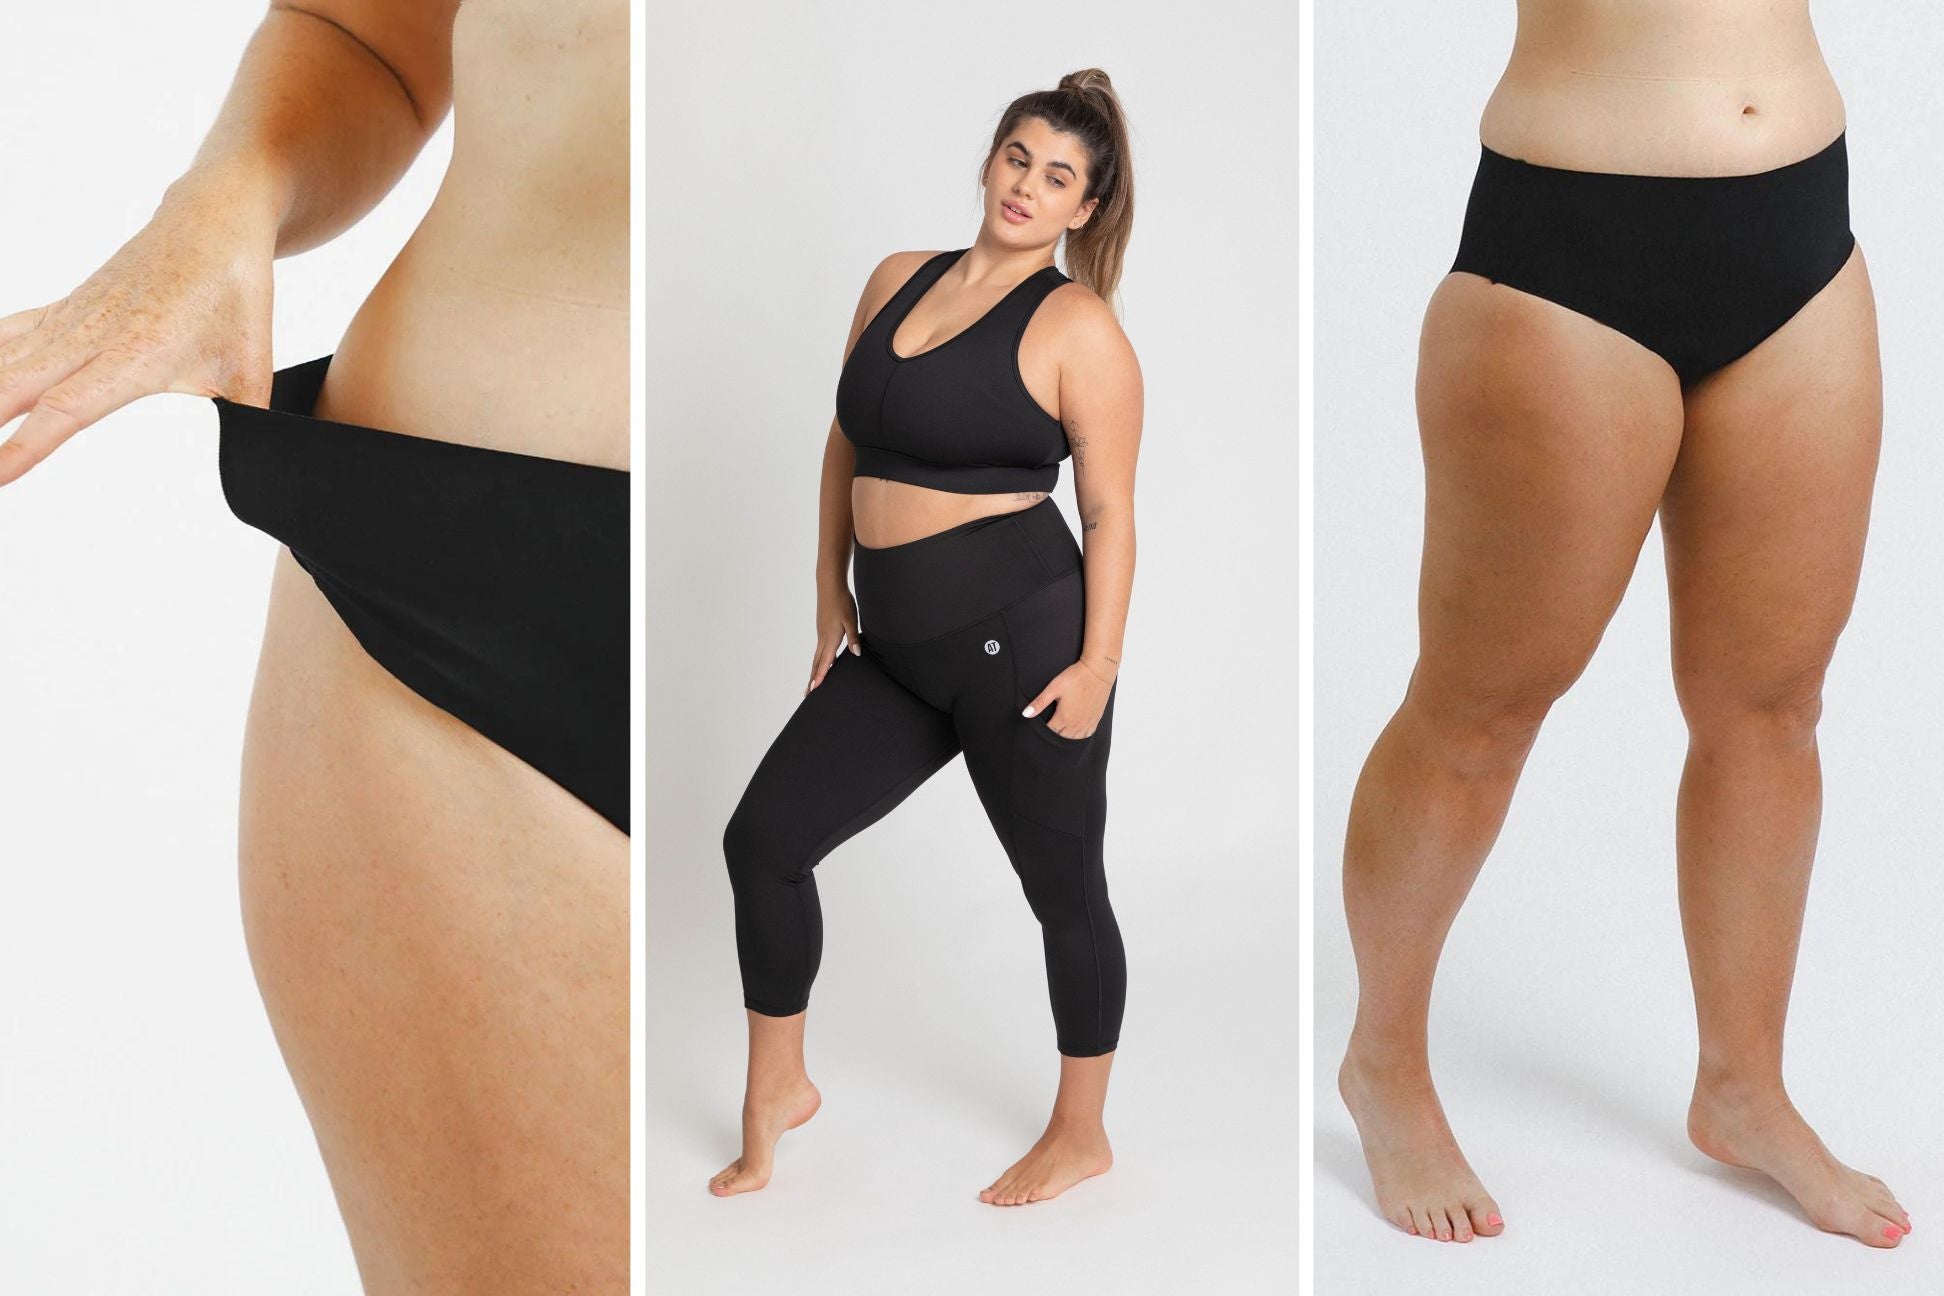 How to Prevent VPL in Leggings: The Ultimate Guide